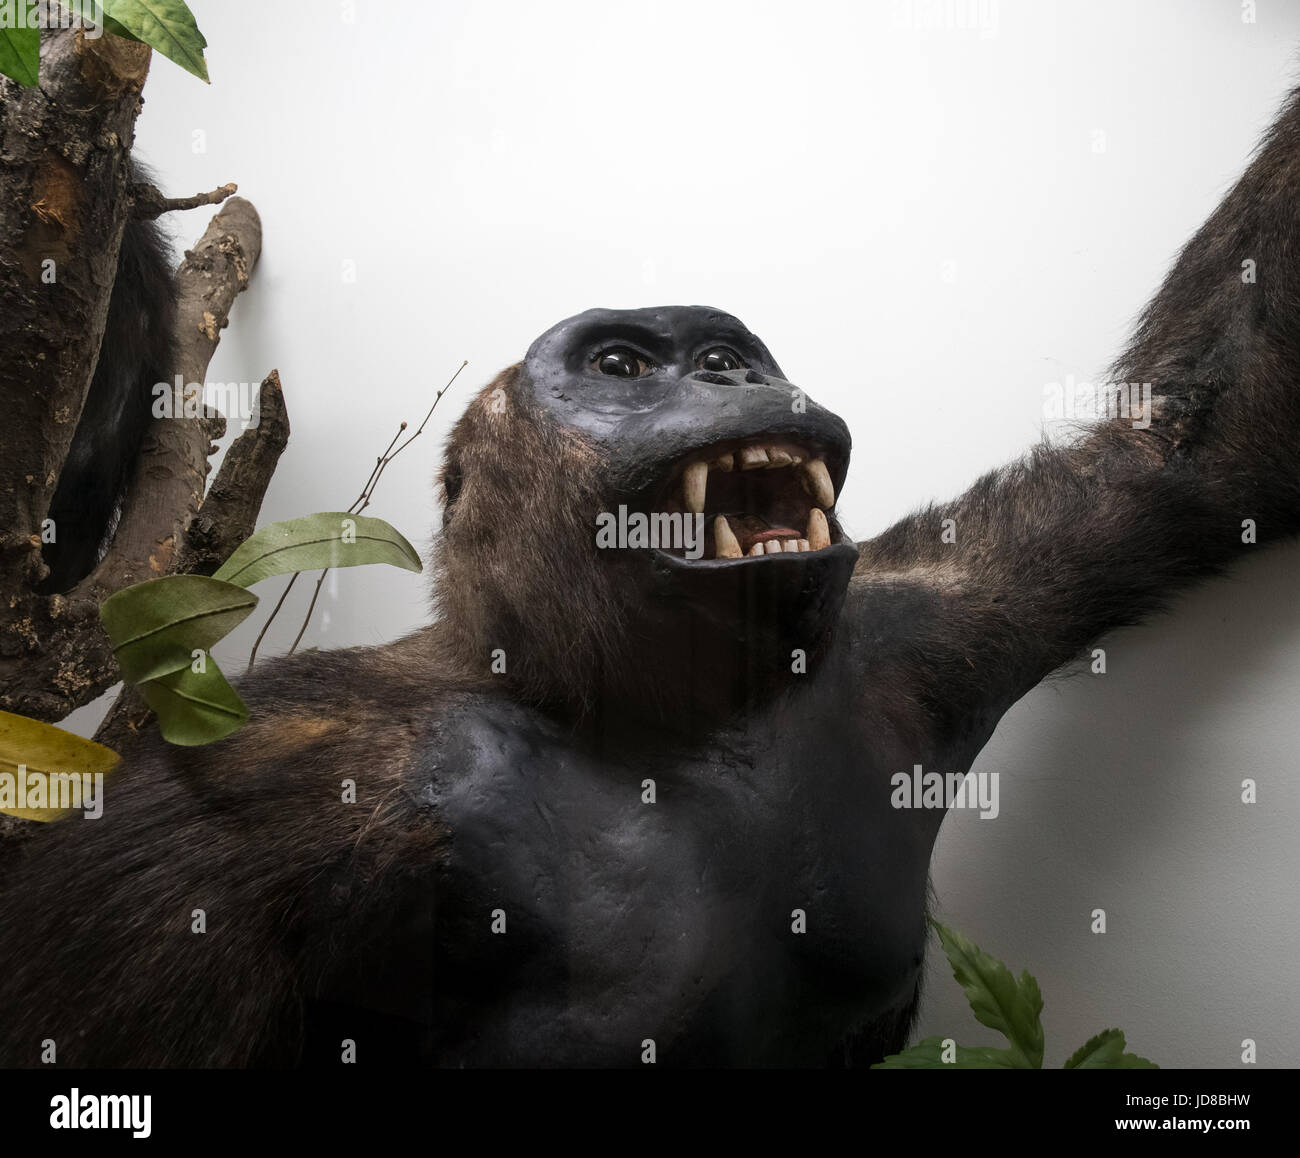 Portrait of stuffed ape with mouth open and large teeth, arm raised. stuffed animal isolated colour picture Stock Photo